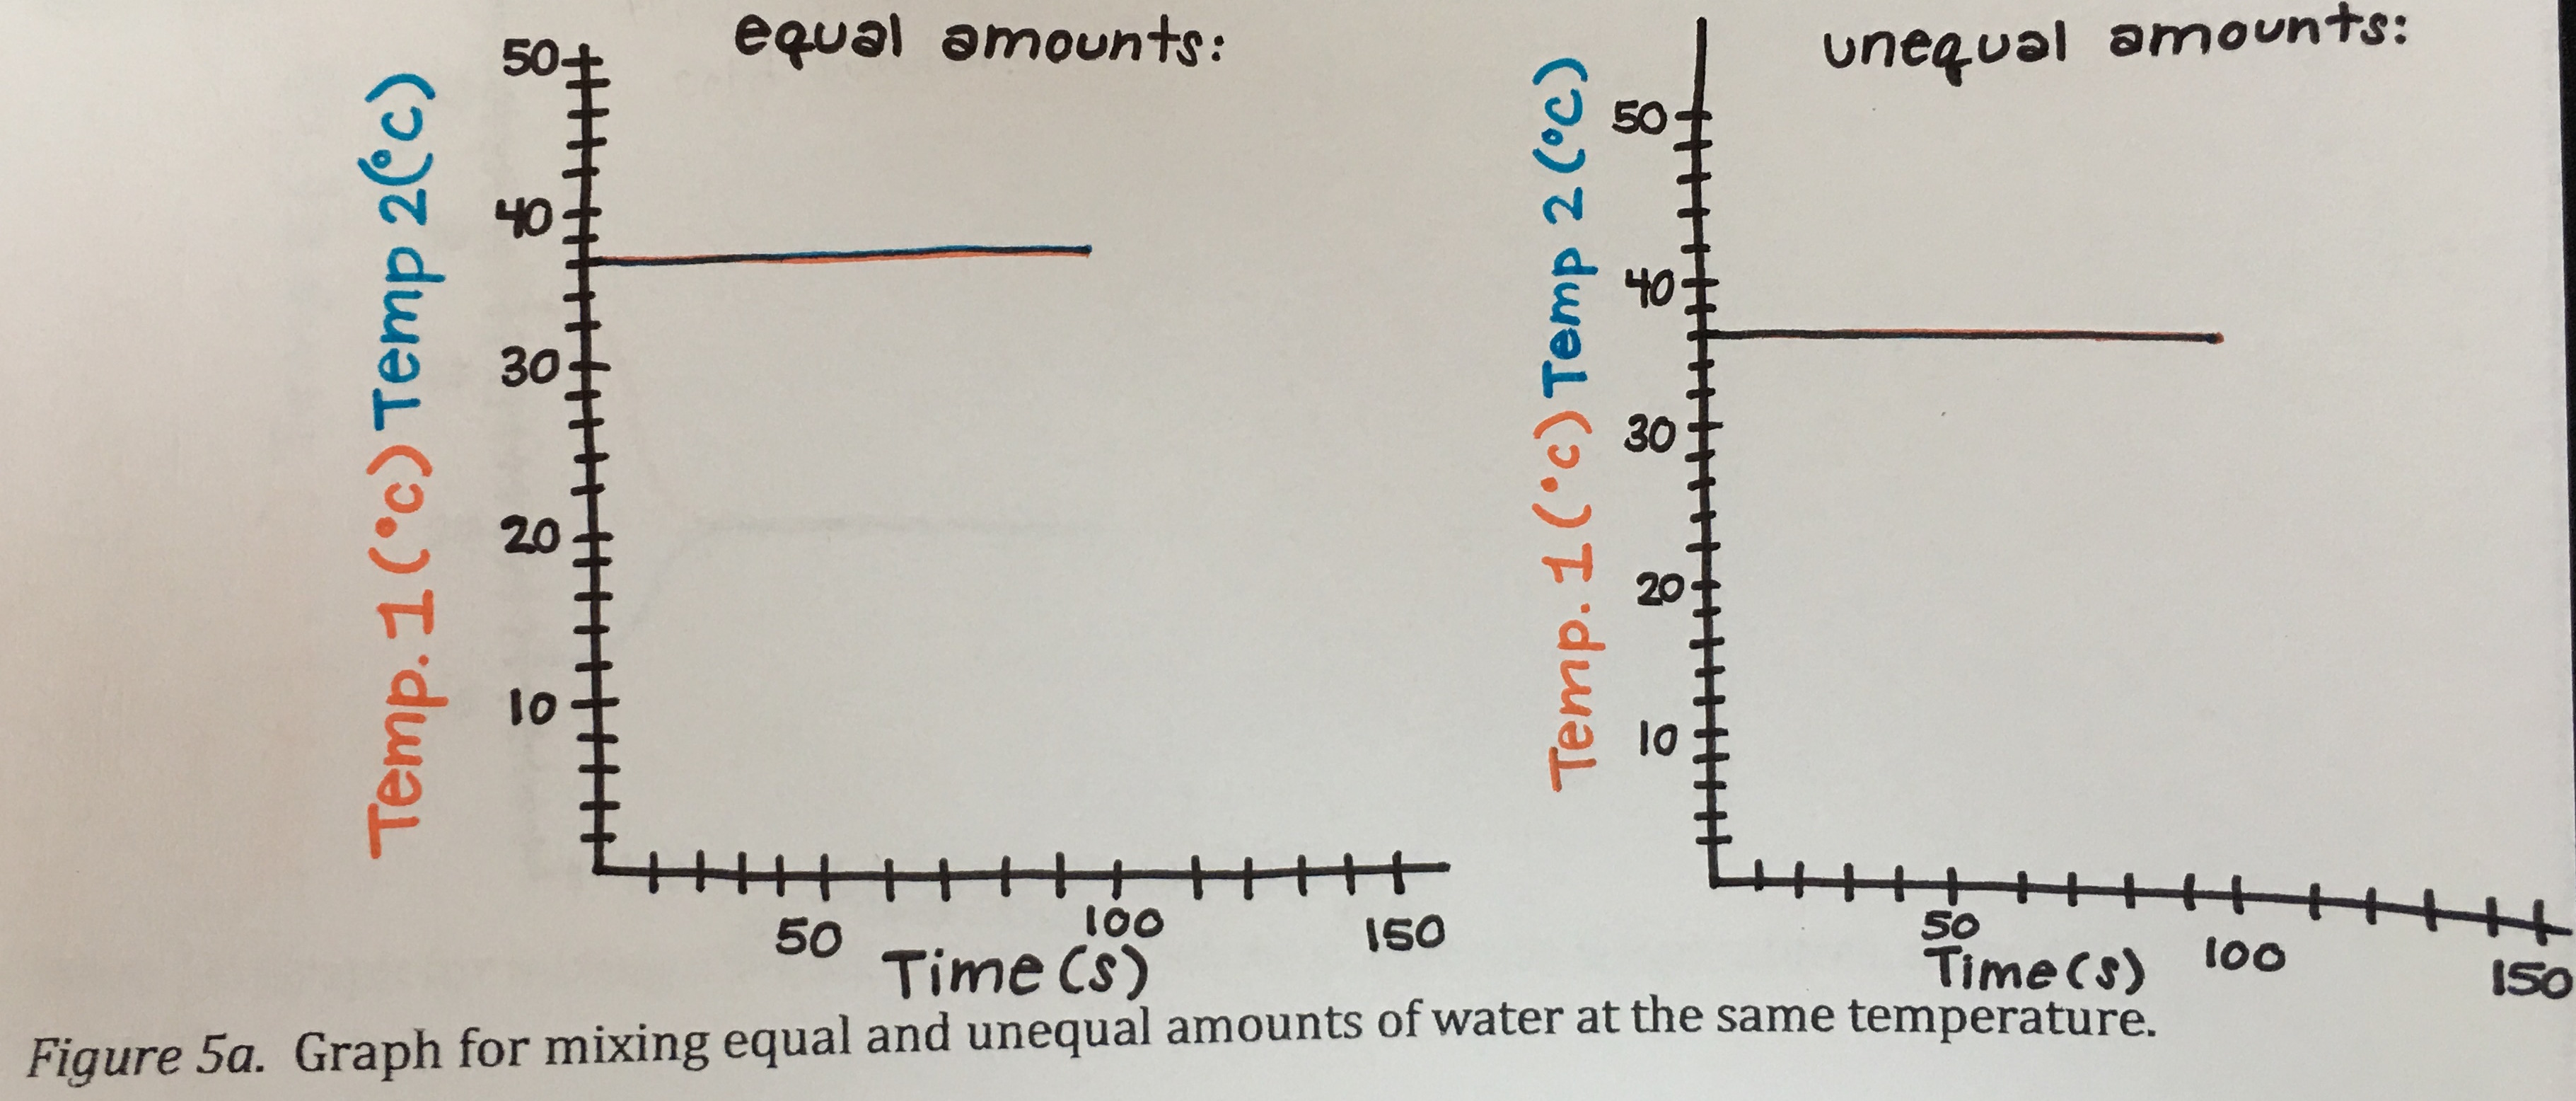 Mixing equal and unequal amounts at the same temperature.